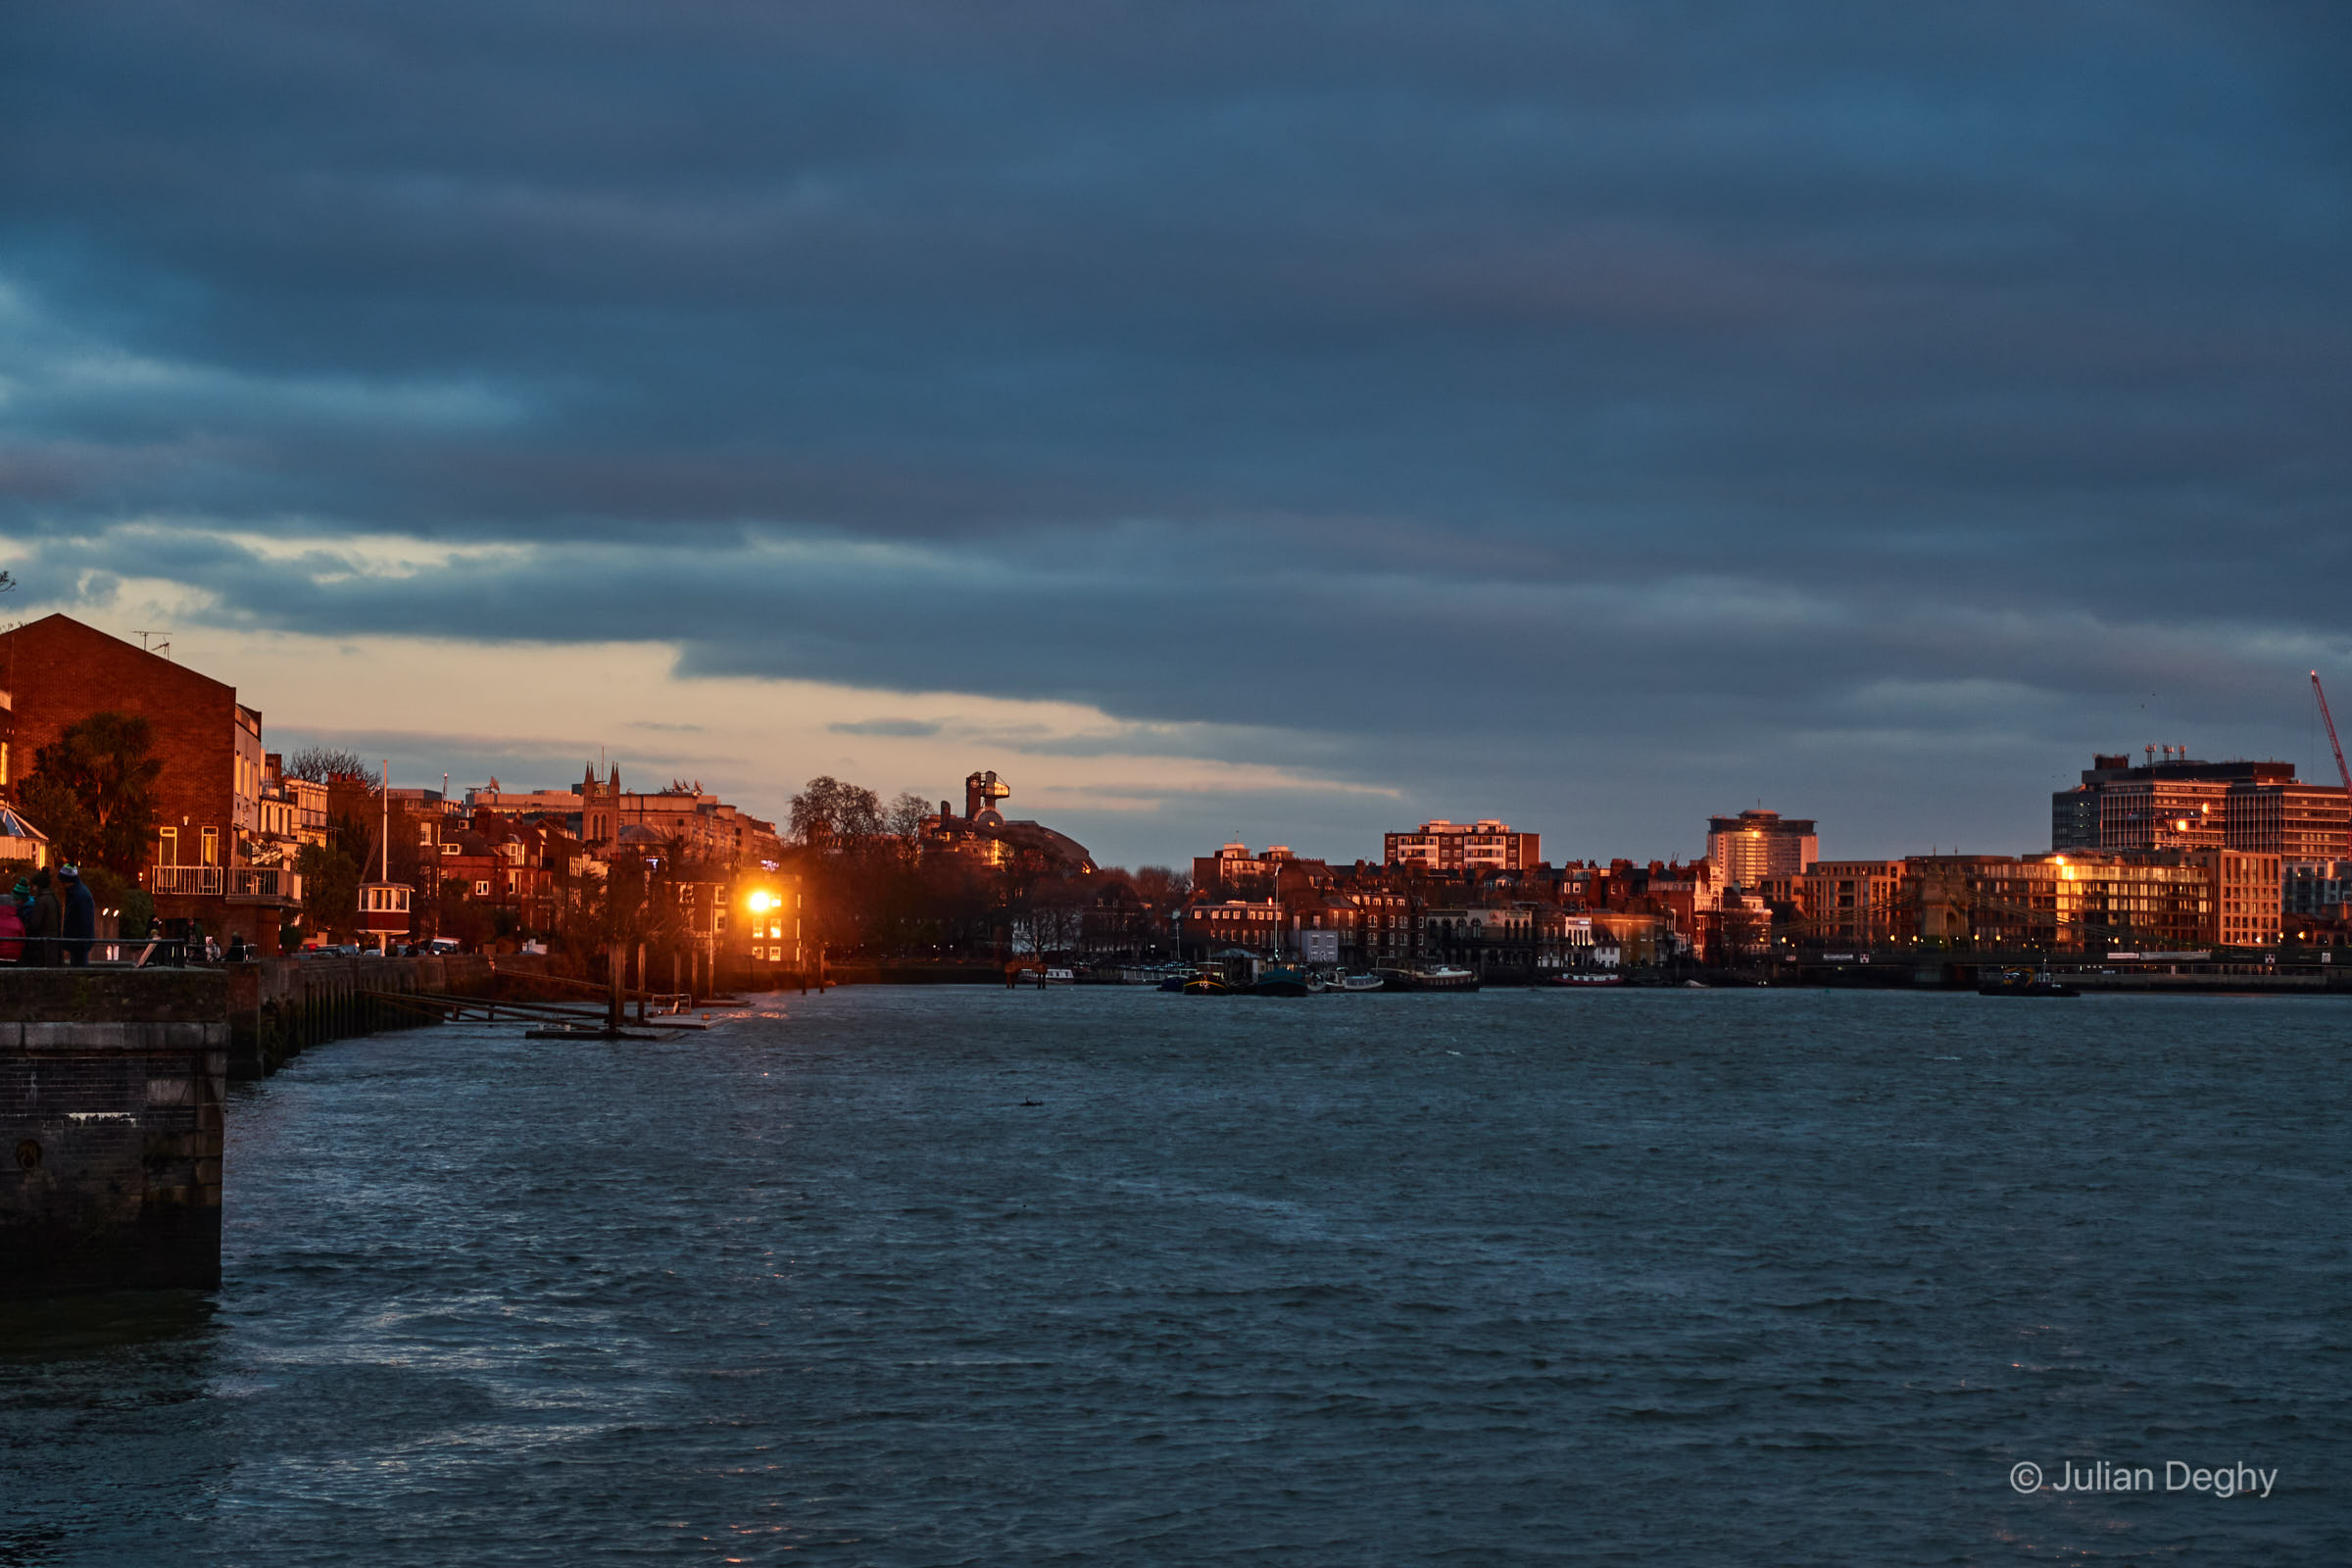 Hammersmith at sunset seen from Chiswick Mall